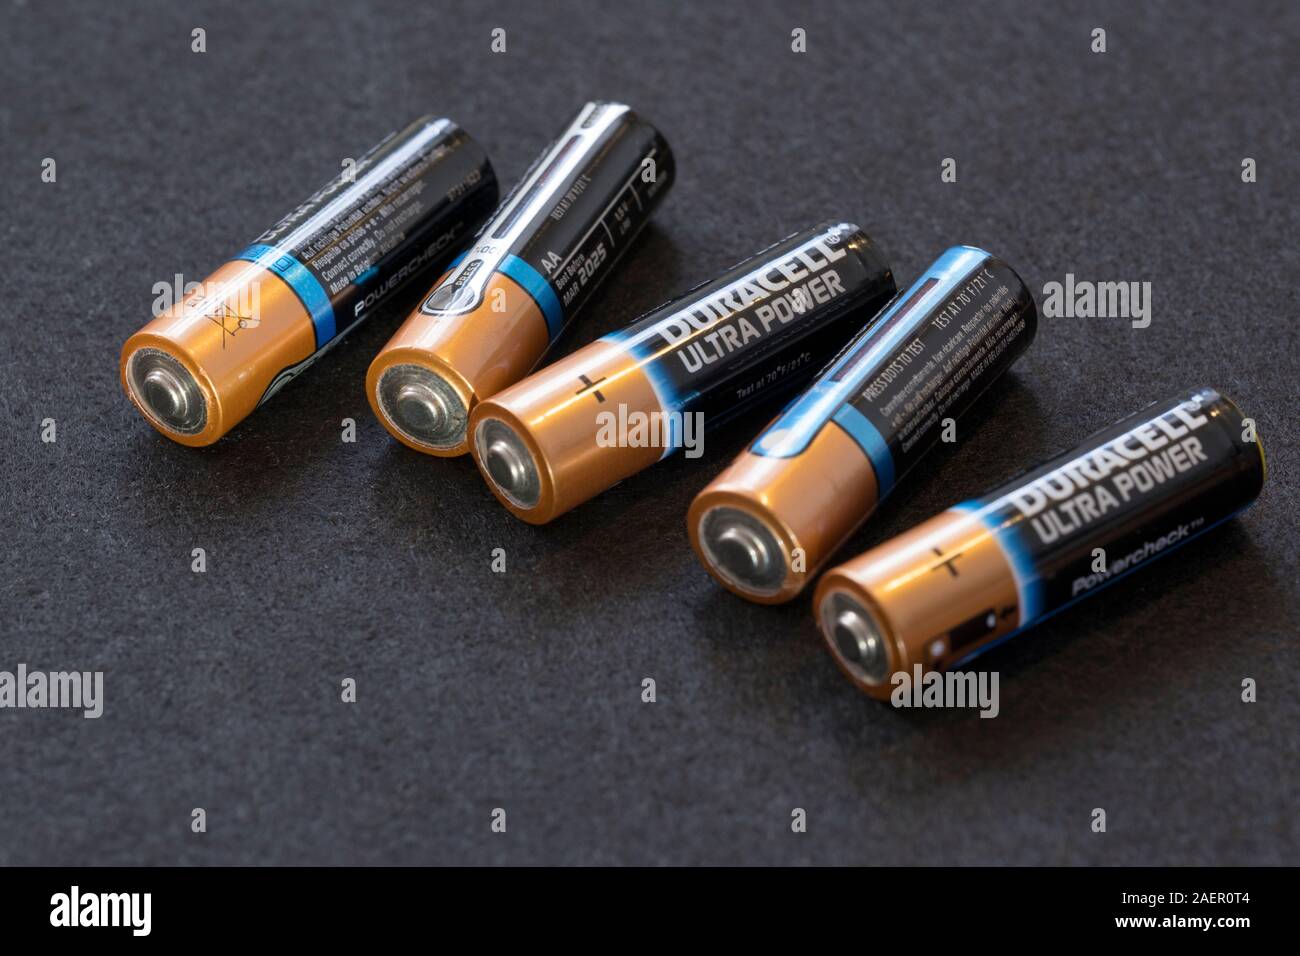 Duracell batteries. Stock Photo